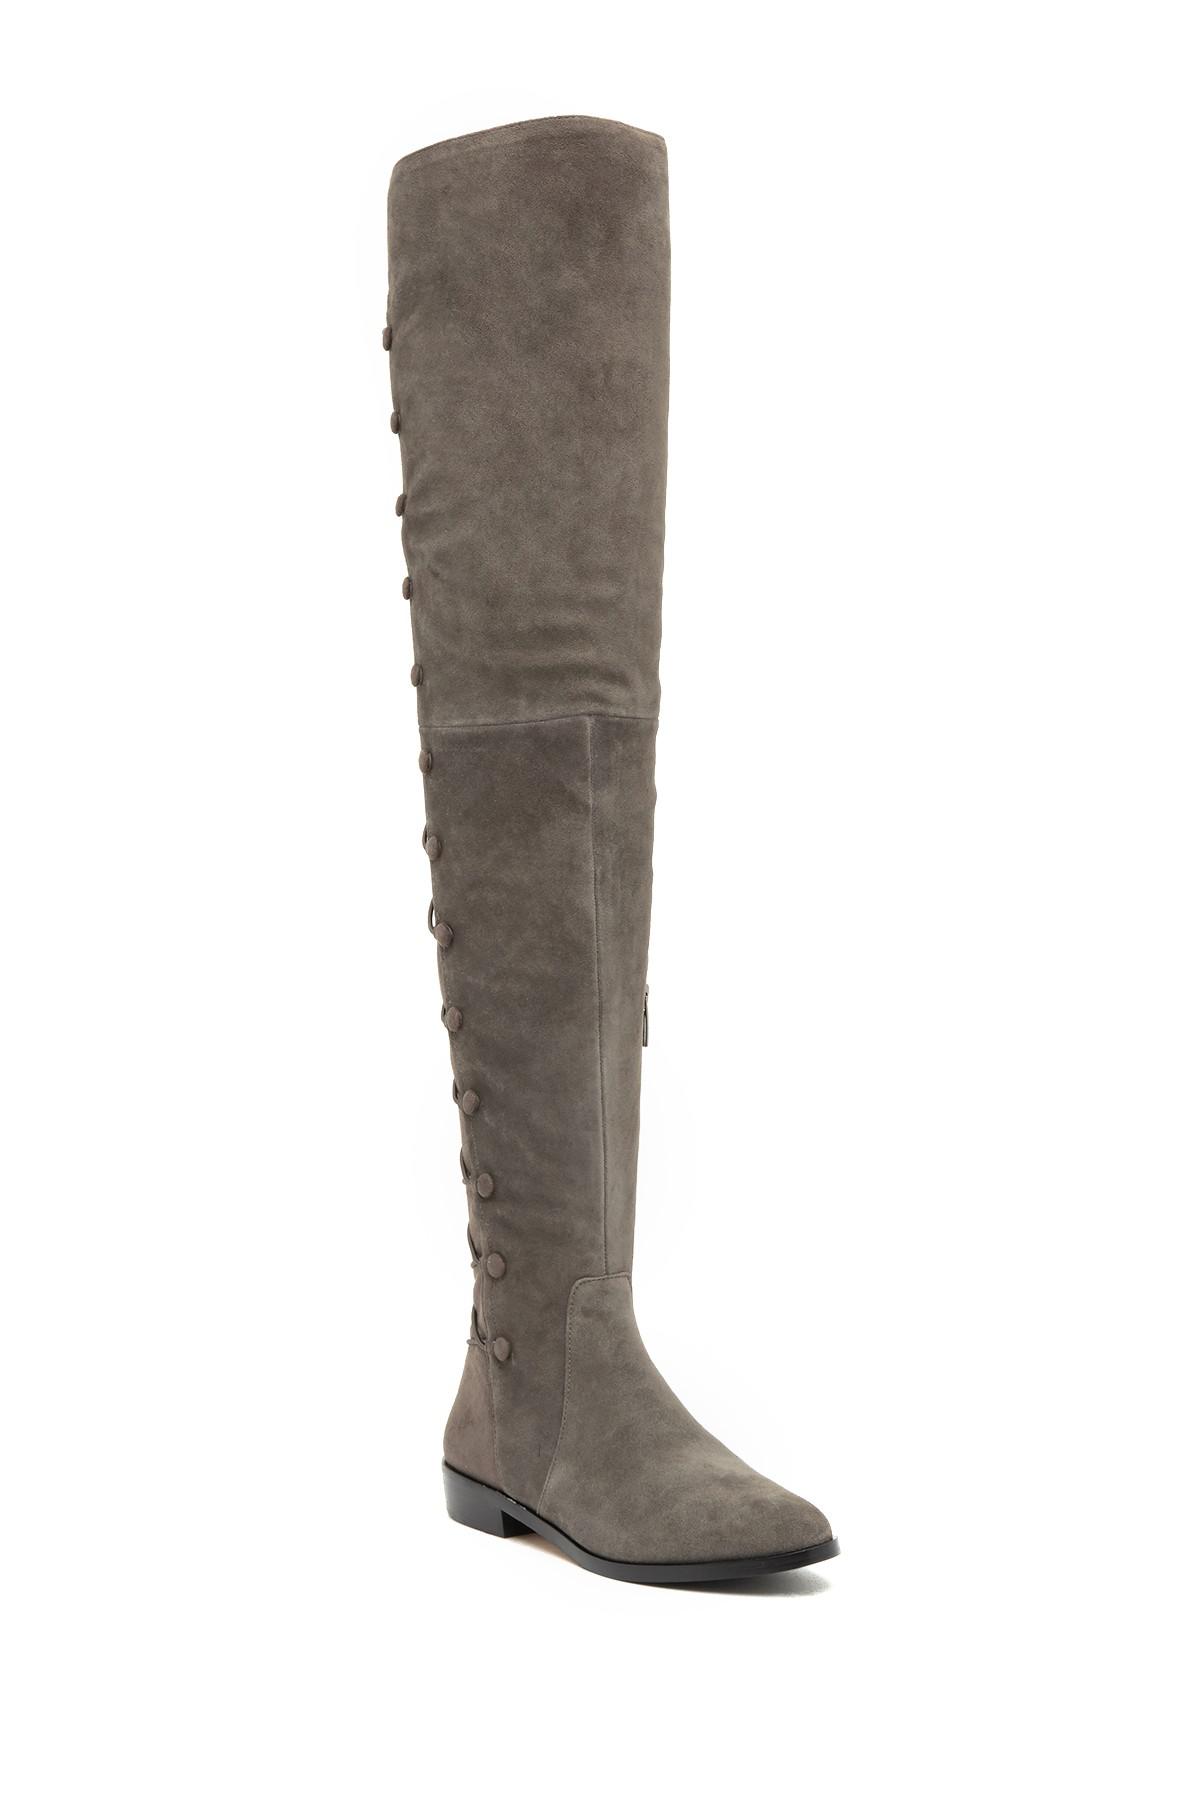 Vince Camuto Suede Croatia Over The Knee Boot in Grey 02 (Gray) - Lyst